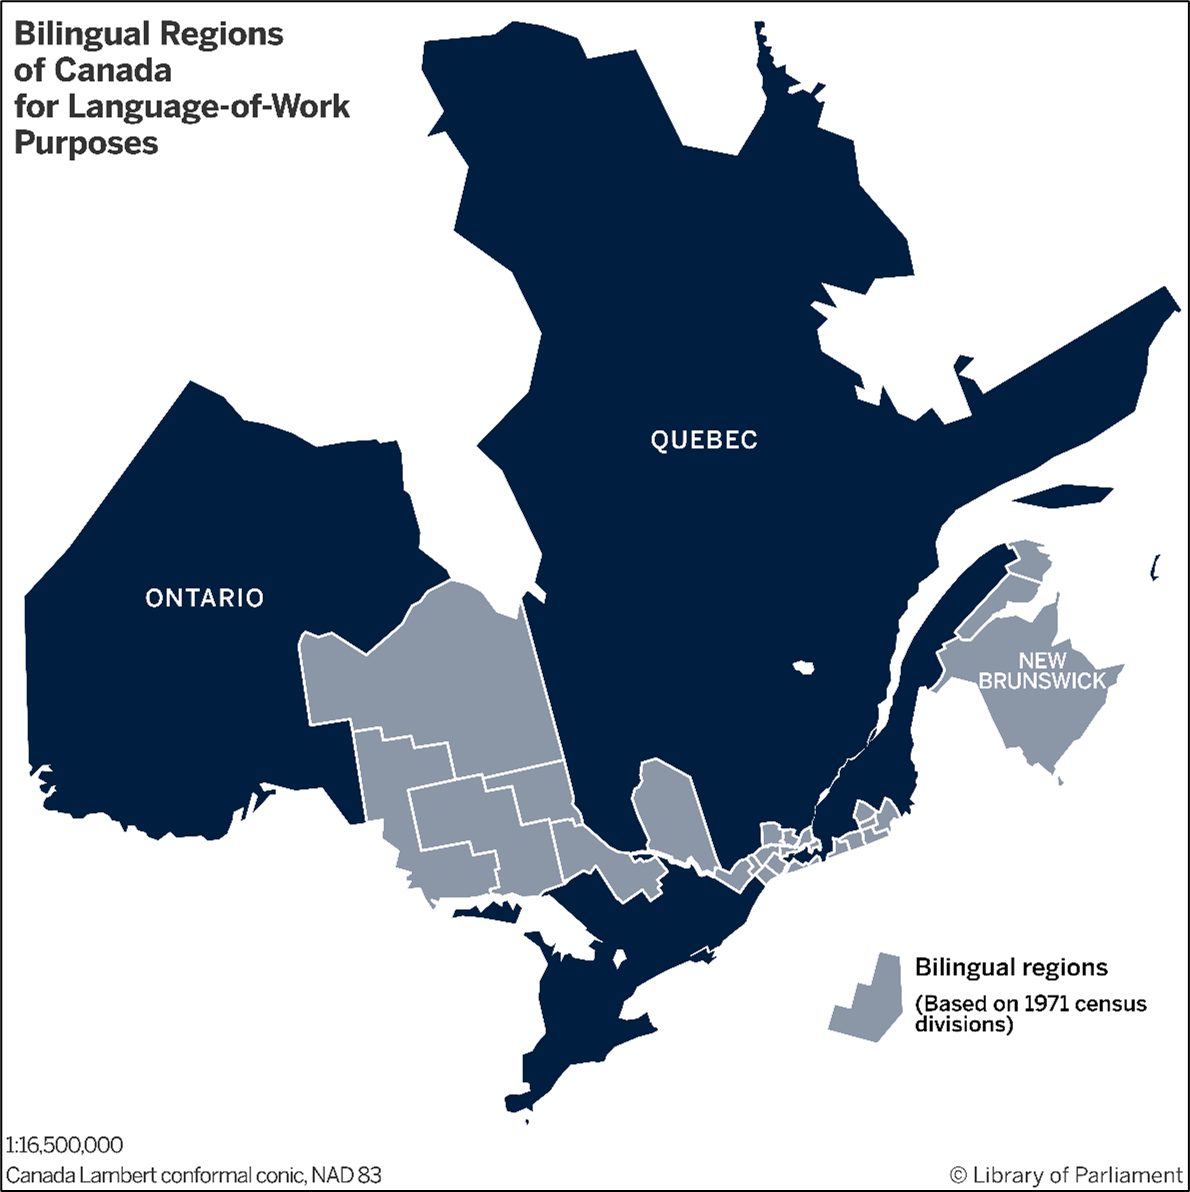 The regions of Canada that are considered bilingual for the purpose of language of work, as determined by the federal government in 1977, include the National Capital Region, the province of New Brunswick, some parts of the Montreal census metropolitan area, certain other parts of Quebec and parts of eastern and northern Ontario.